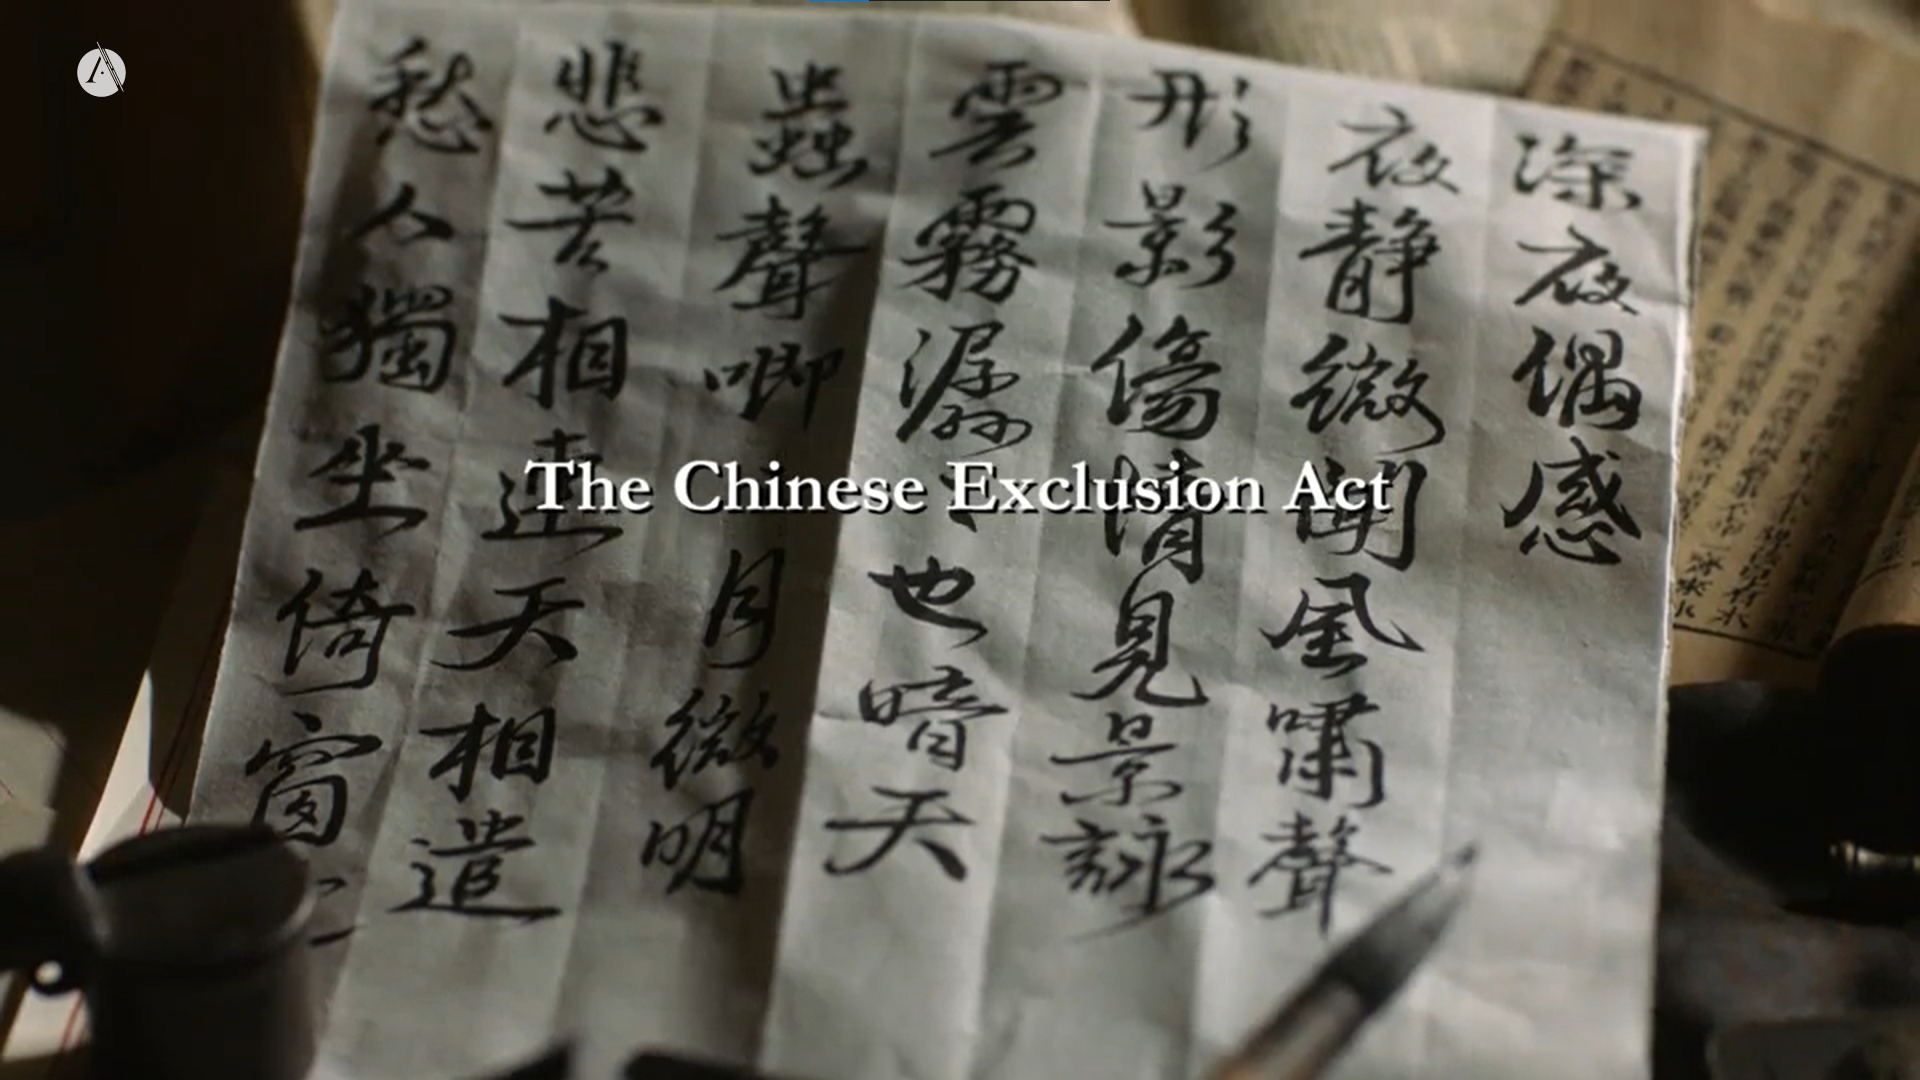 Ancestors in the Americas, Part 1 (2001) // The Chinese Exclusion Act (2017) still